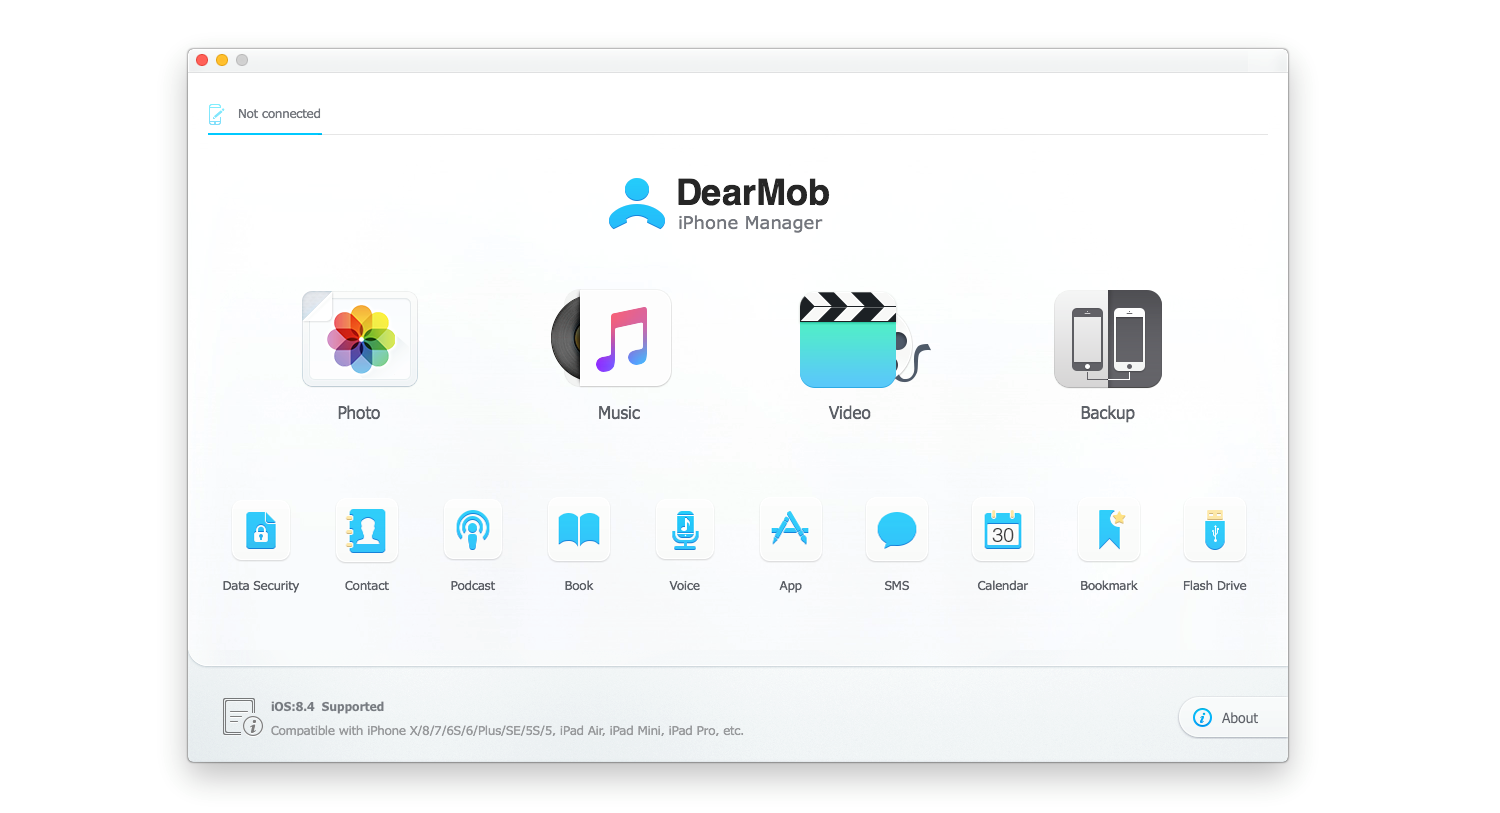 >DearMob iPhone Manager